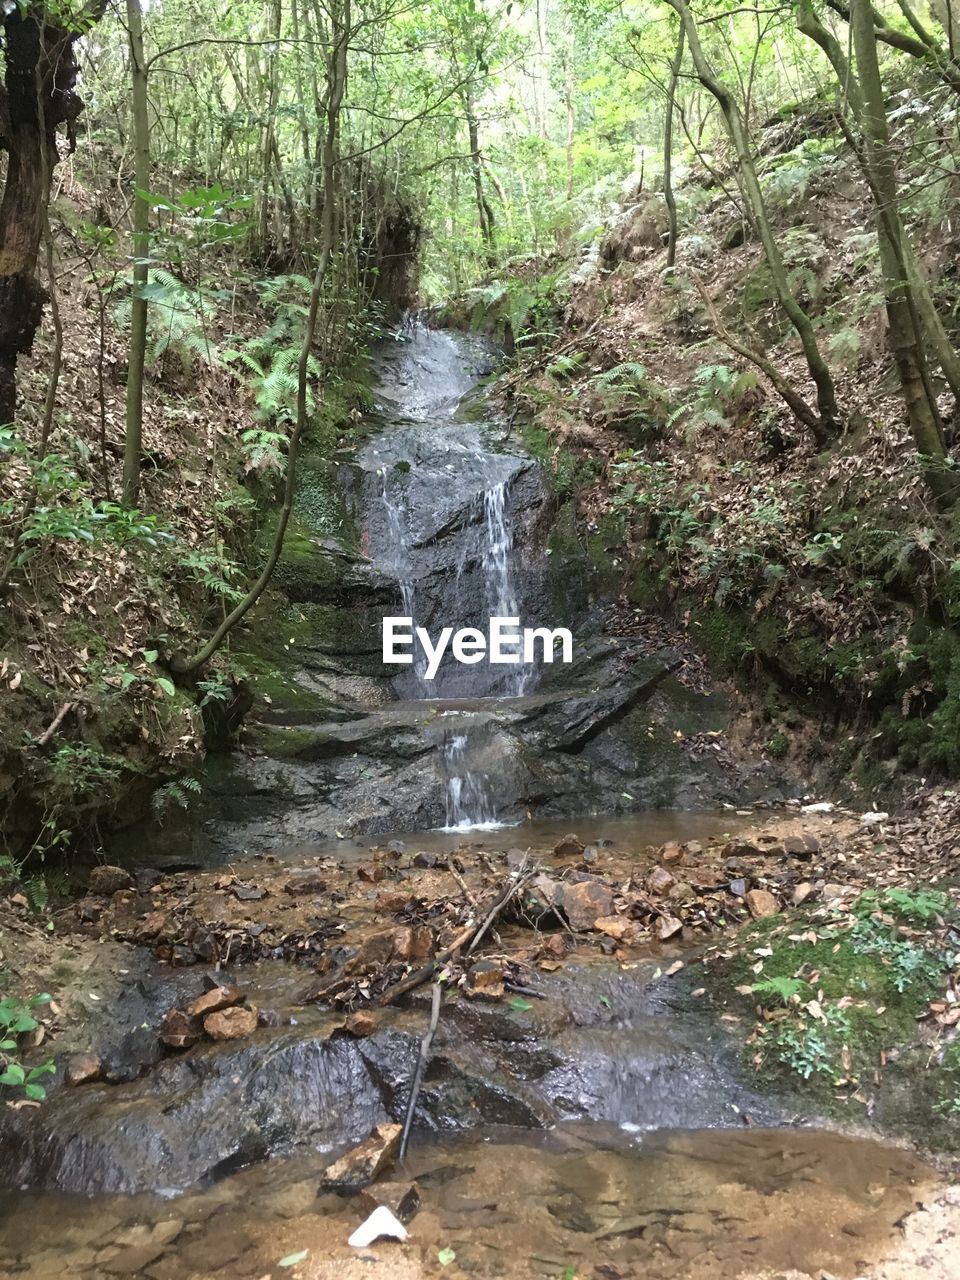 WATER FLOWING IN FOREST